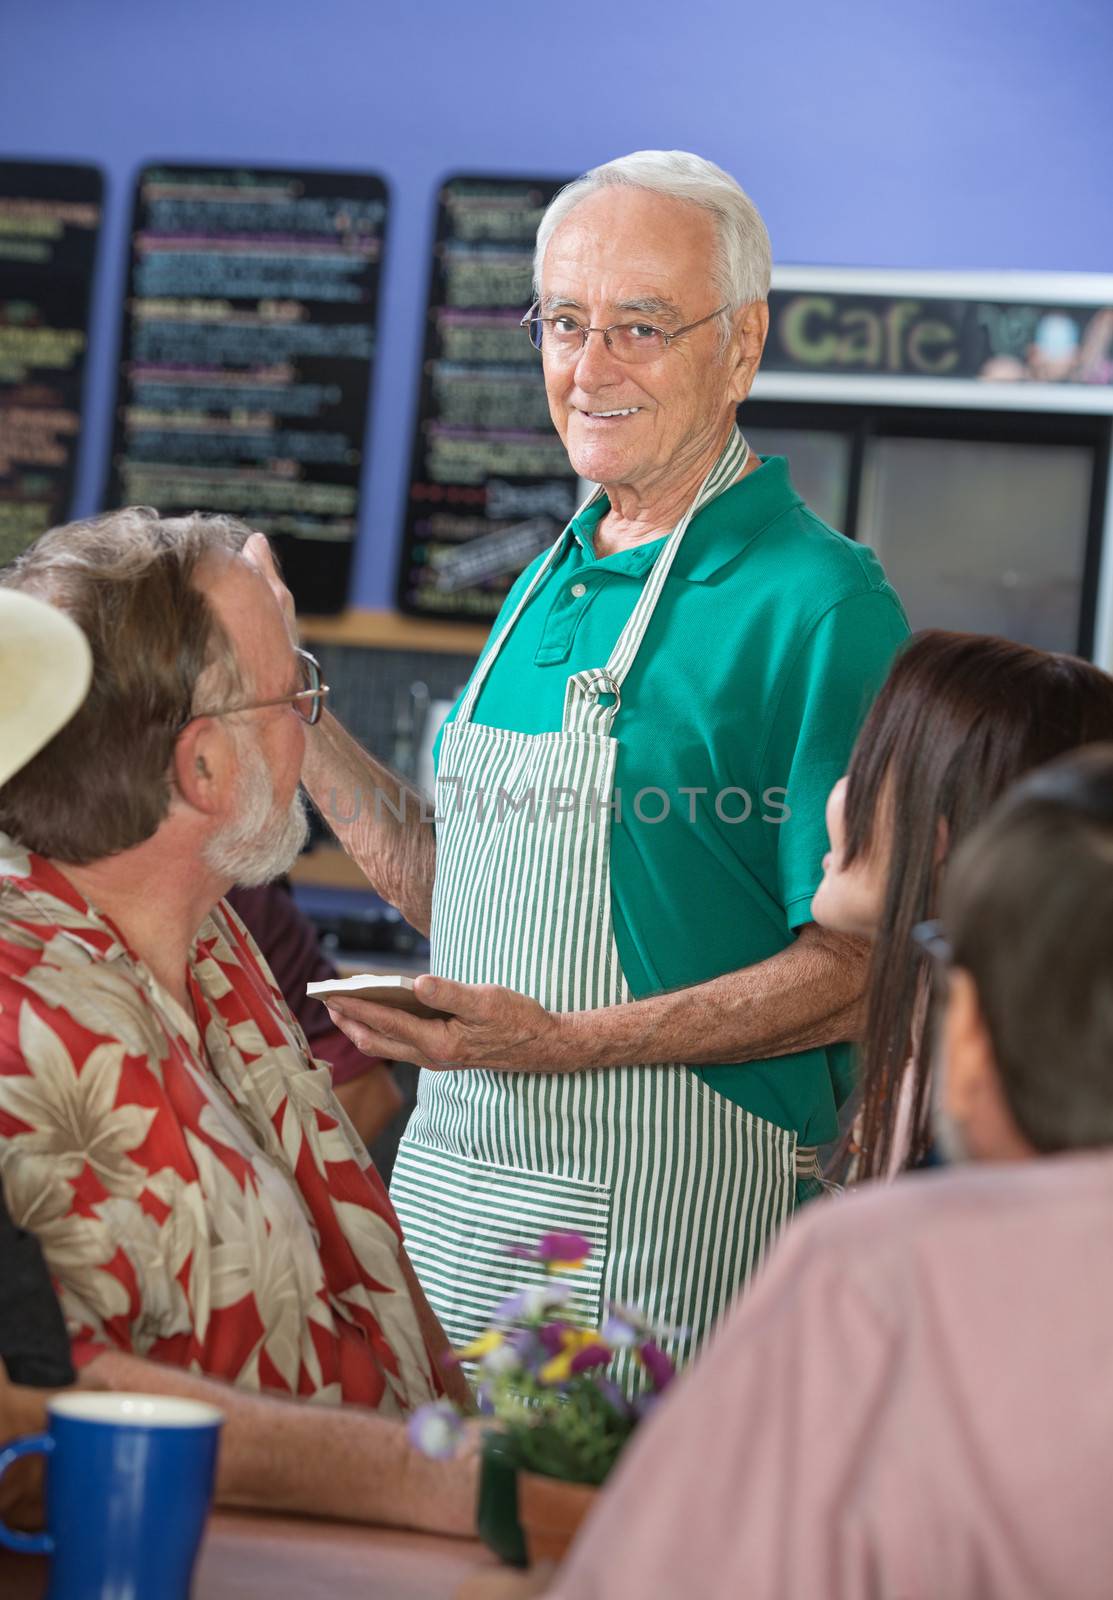 Smiling Cafe Worker with Customers by Creatista